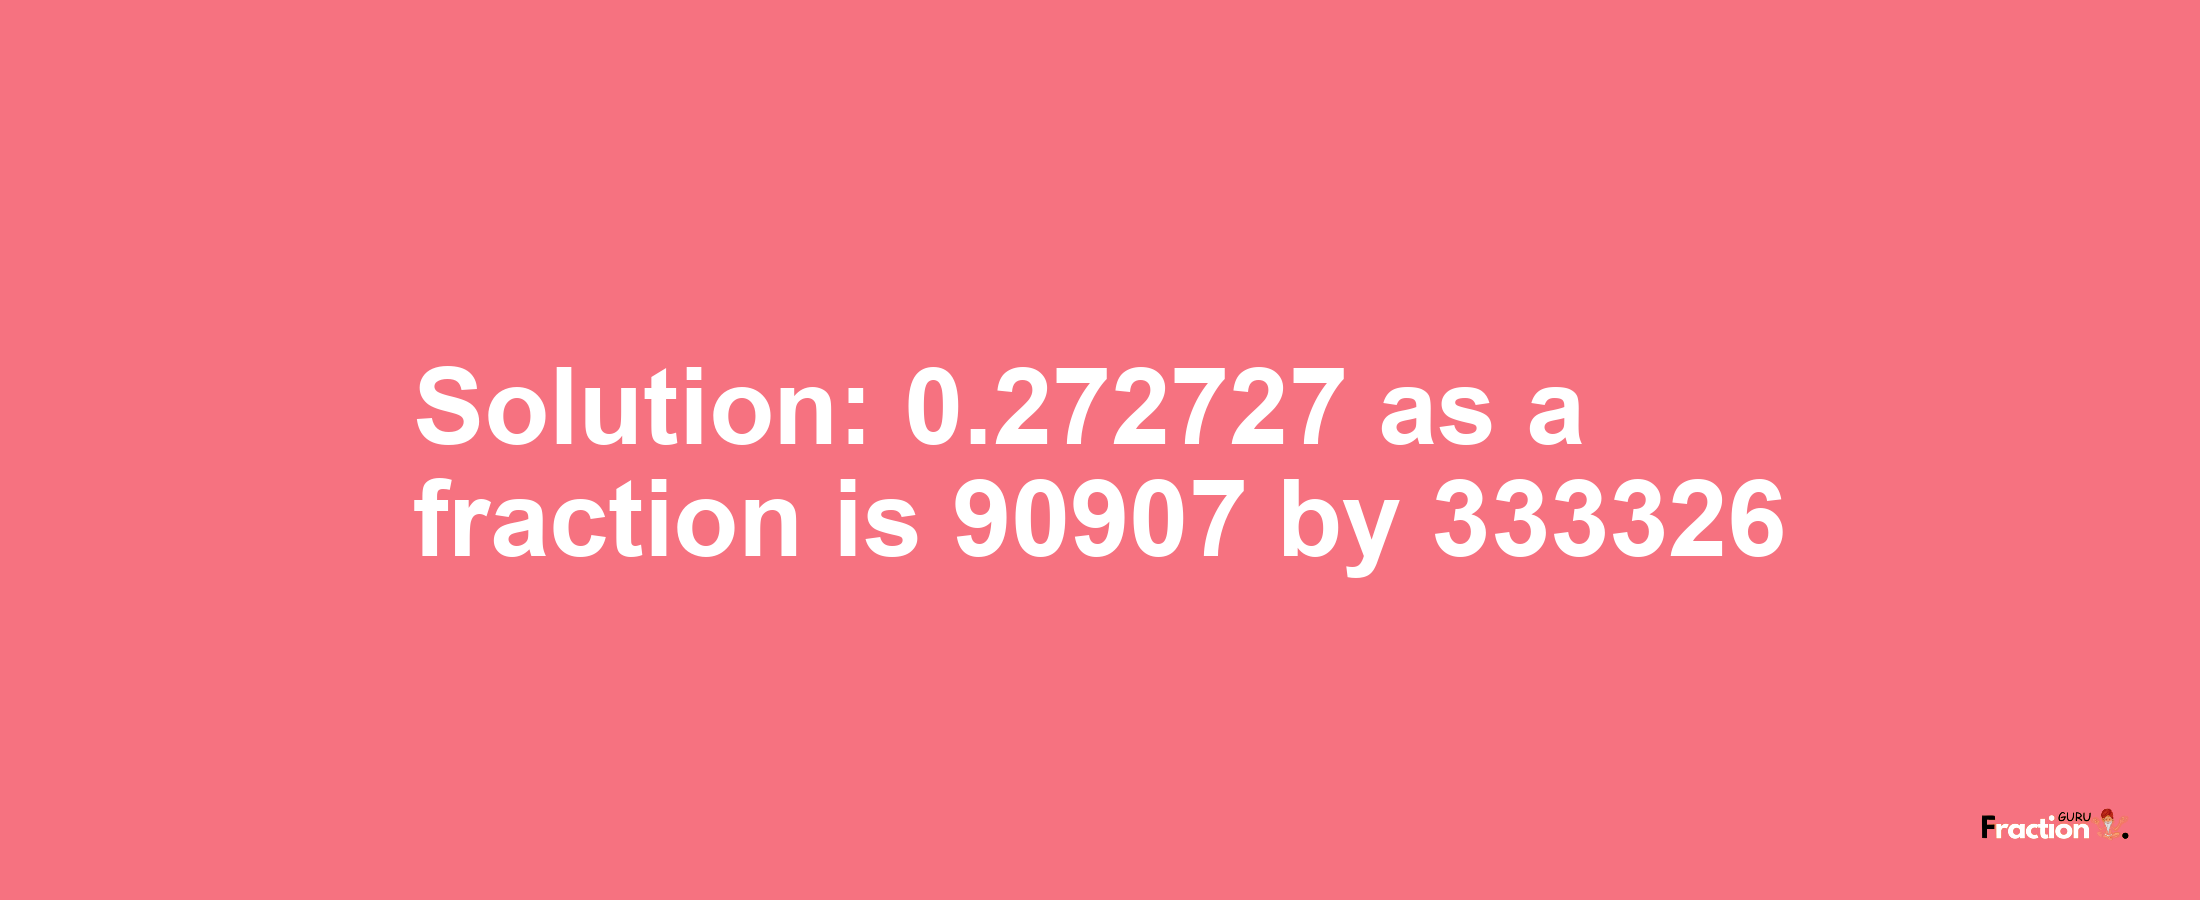 Solution:0.272727 as a fraction is 90907/333326